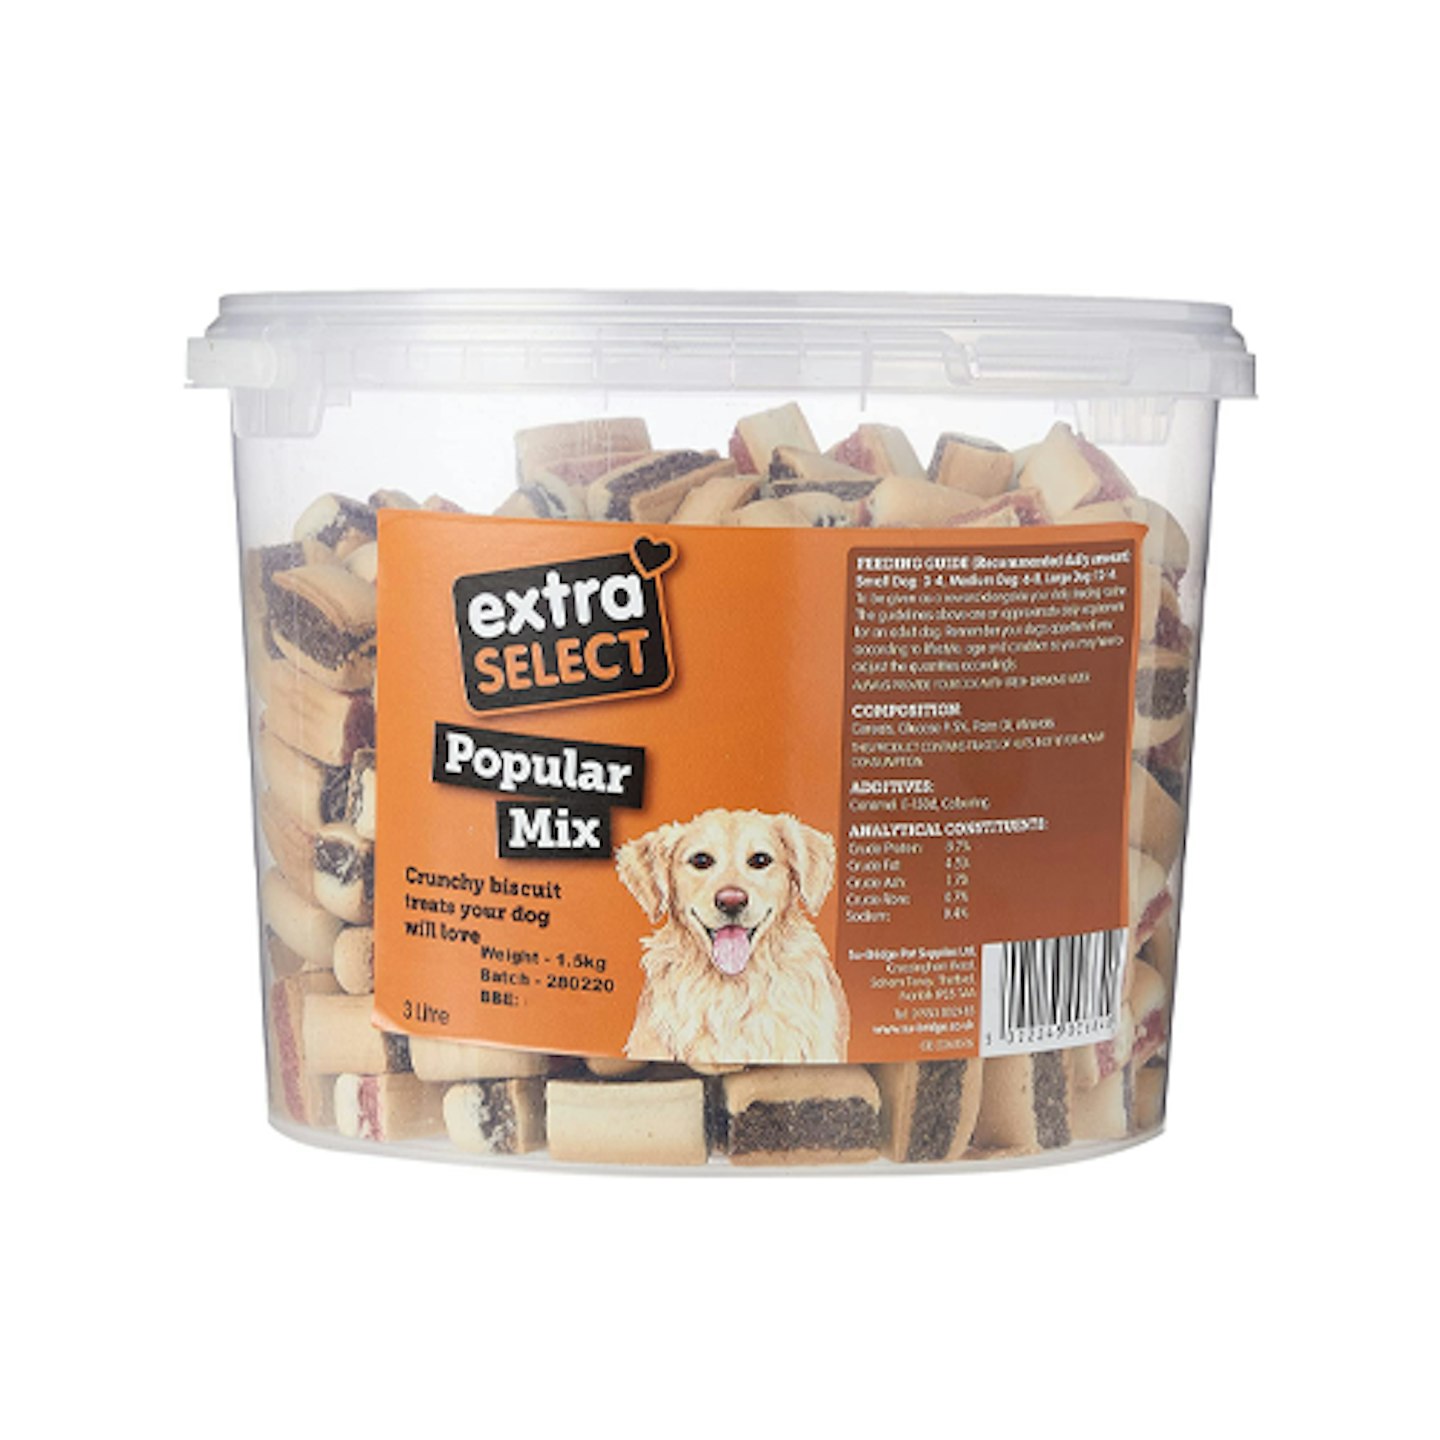 Extra Select Popular Mix Dog Treat Biscuits